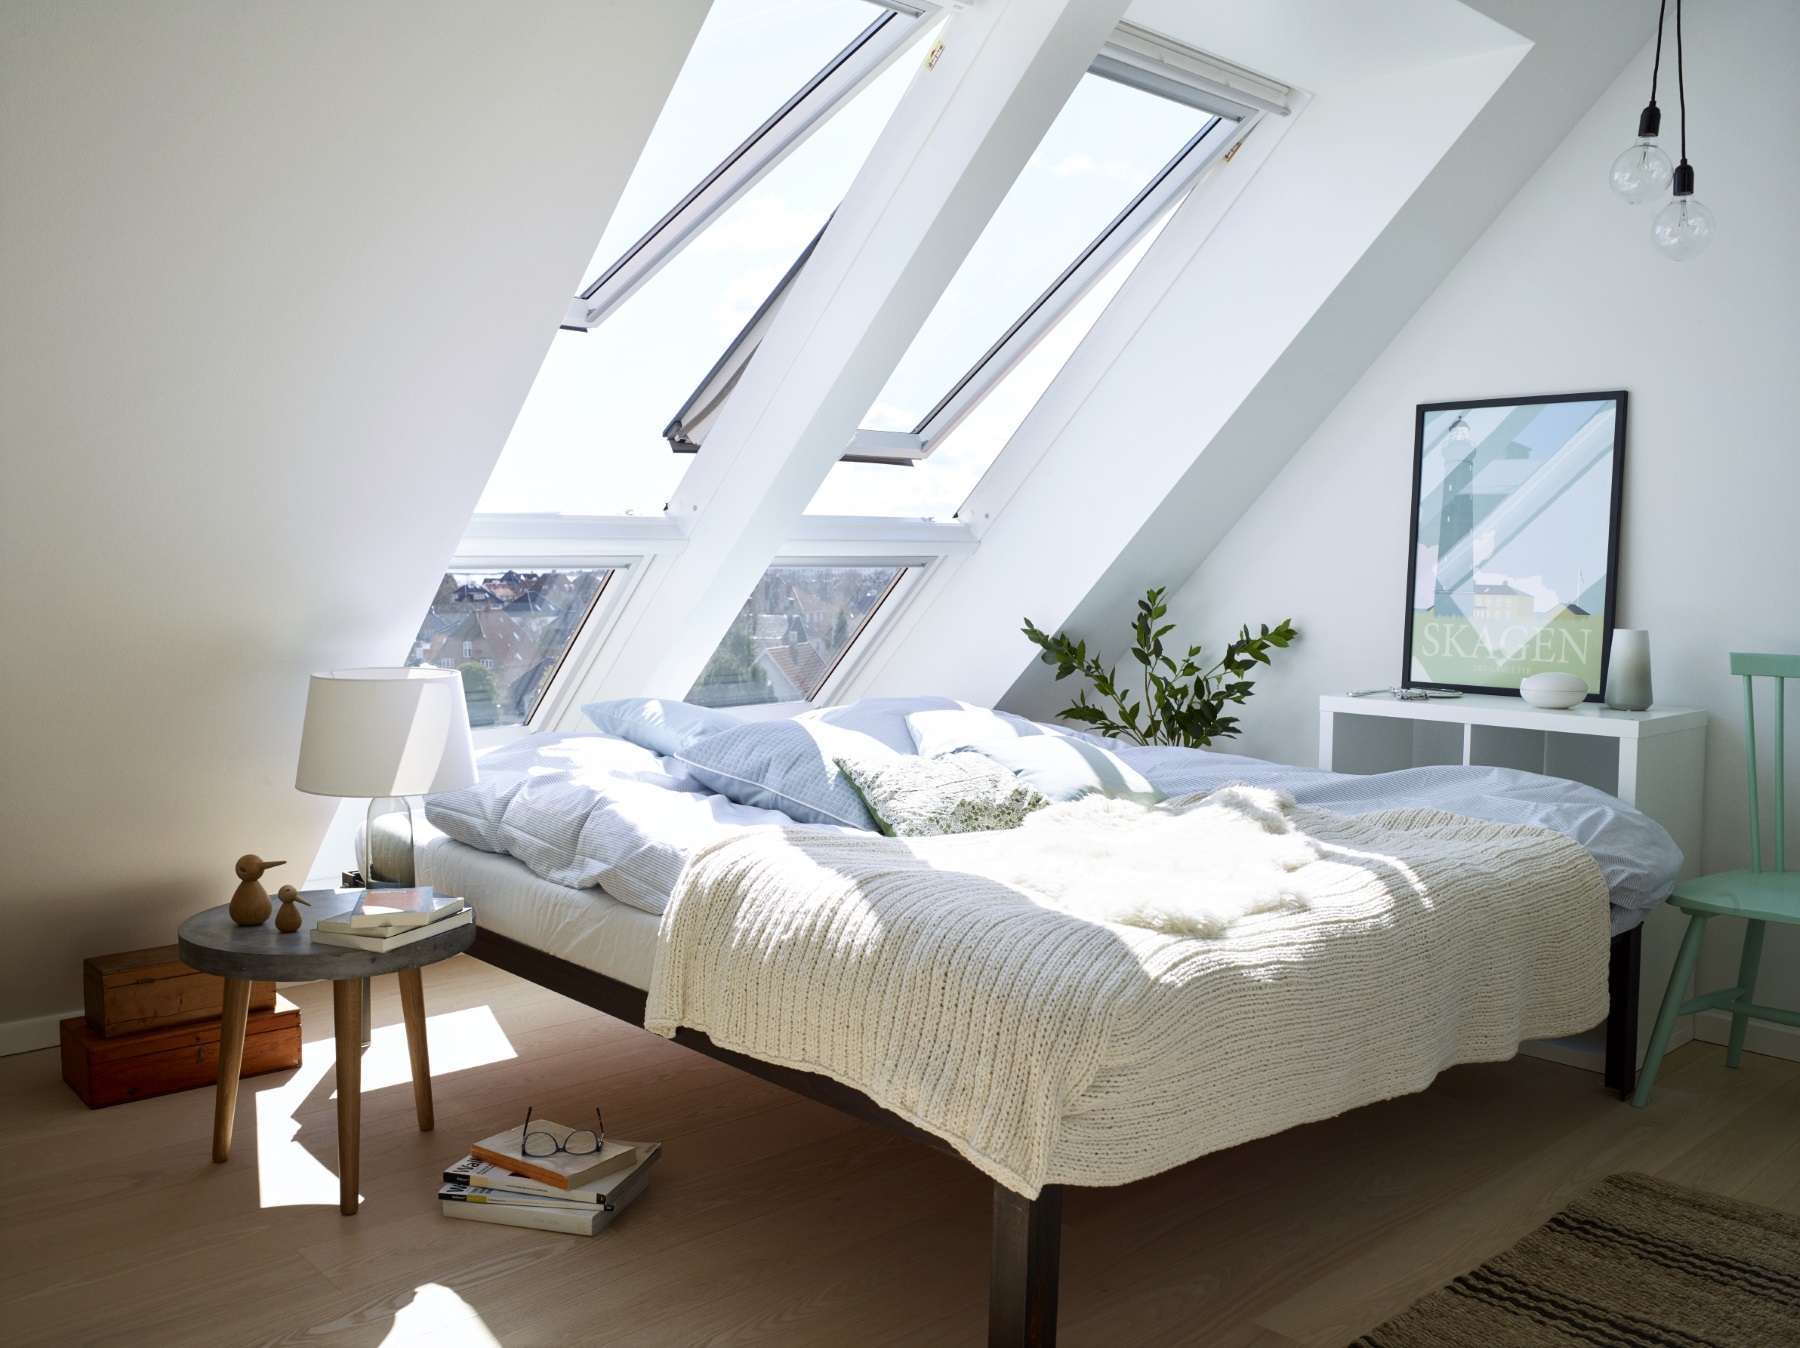 Homeowners urged to enter competition to find the country’s best daylight filled loft conversion @VELUX @VELUXGBI